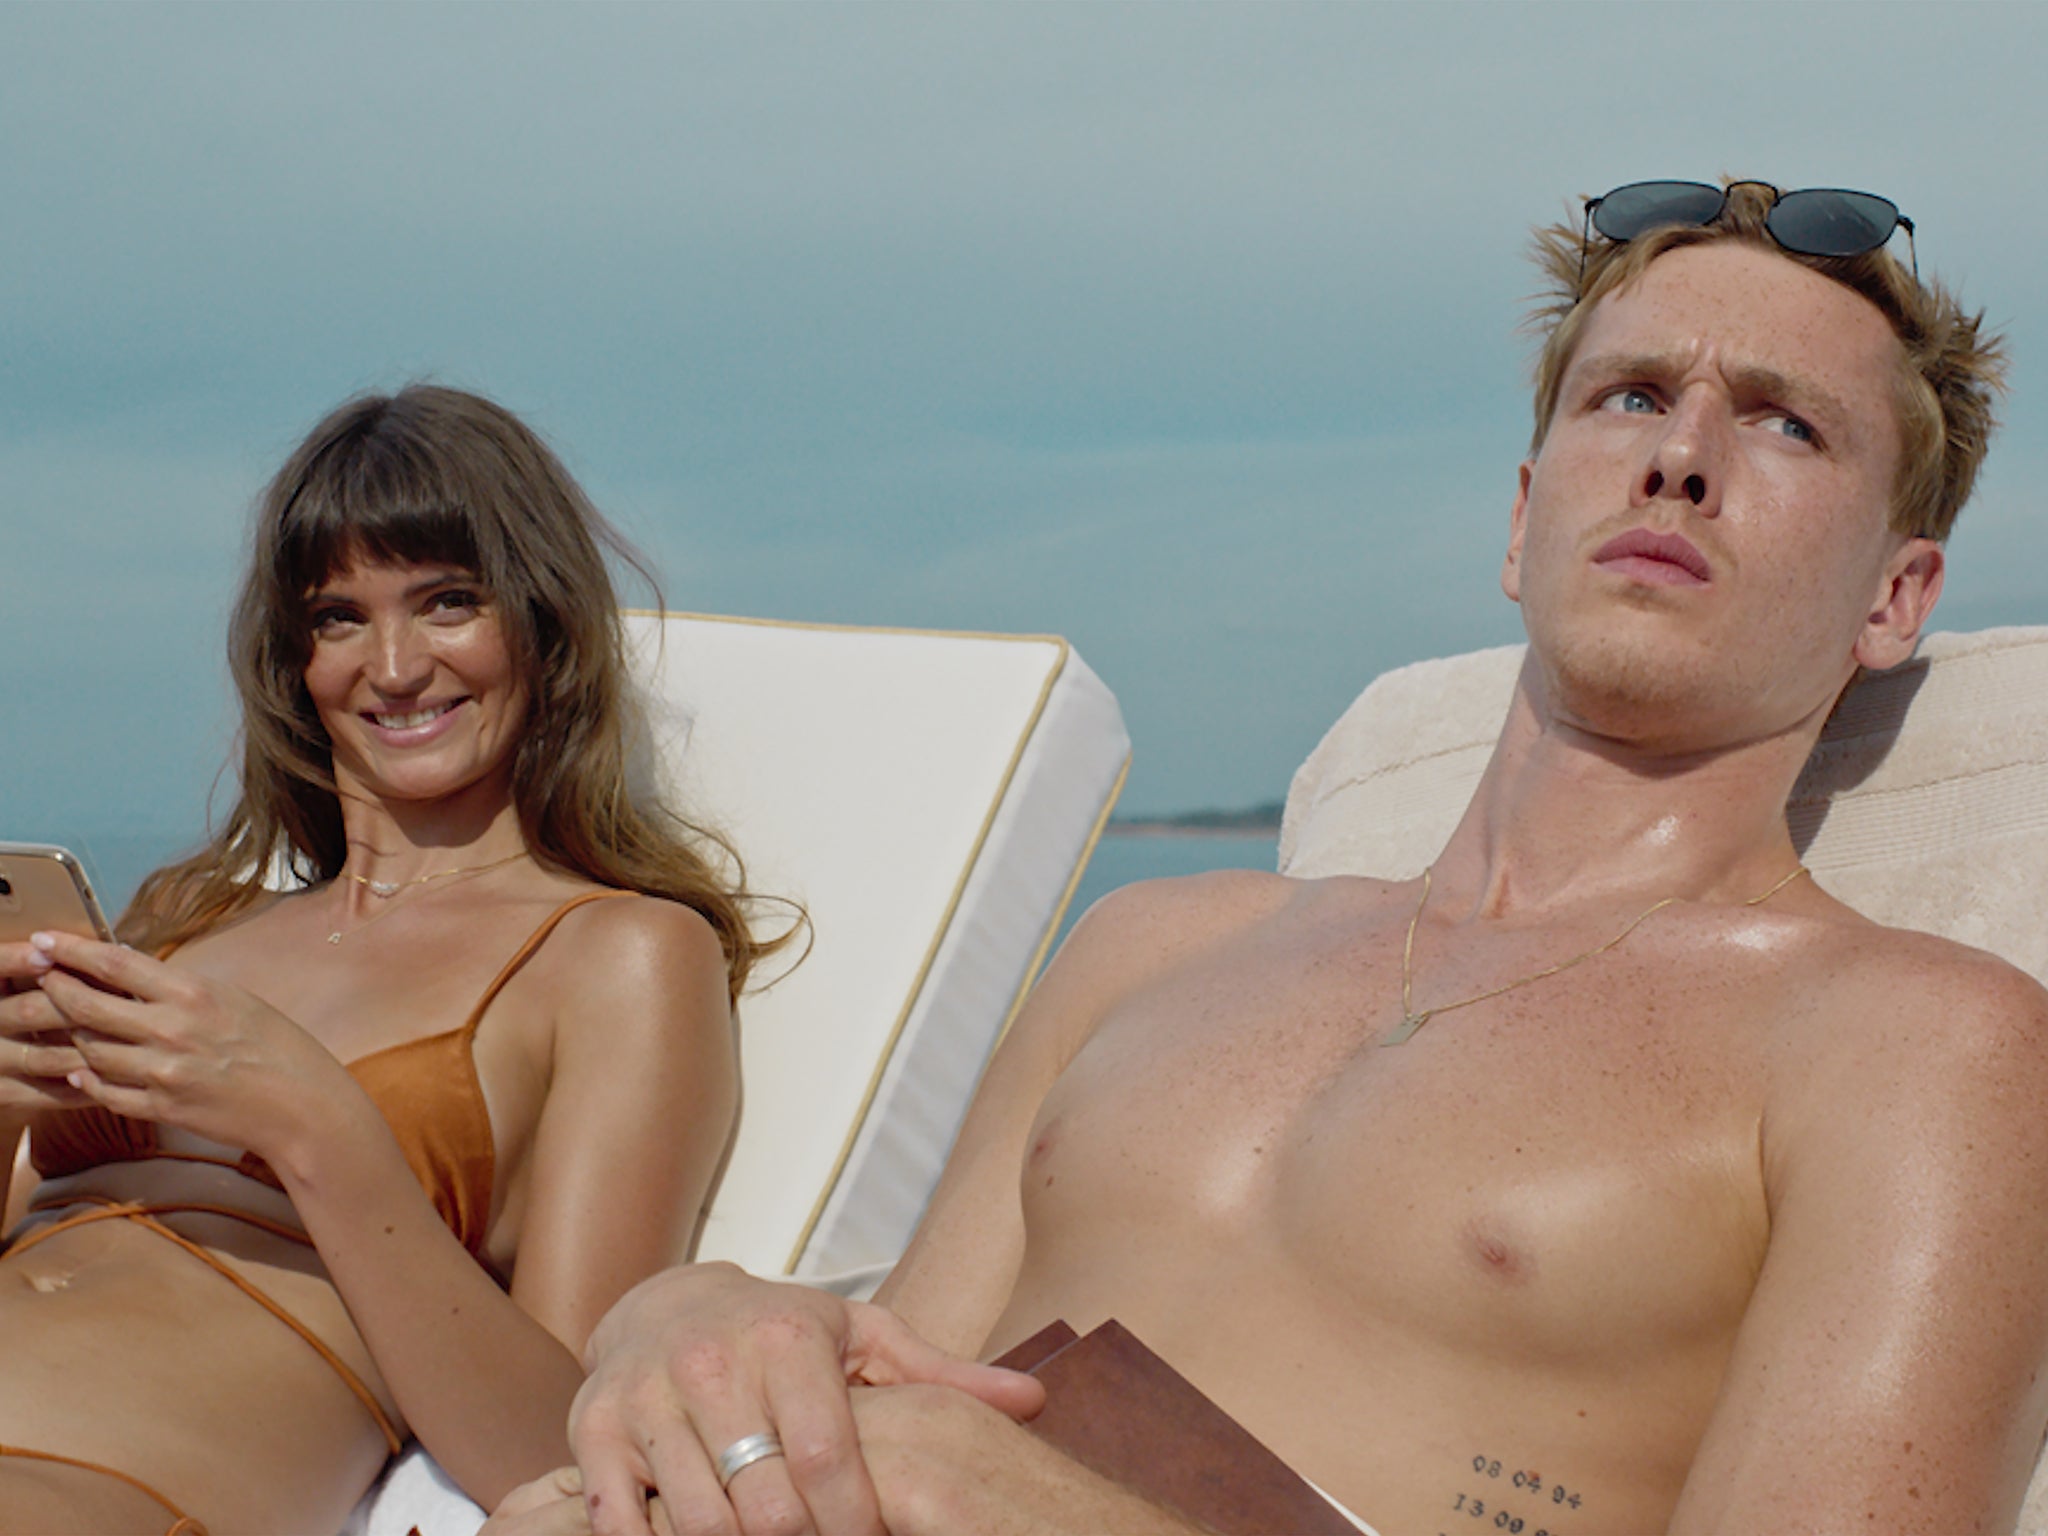 Harris Dickinson as aspiring model Carl and Charlbi Dean as Yaya, his influencer girlfriend, who end up on a luxury cruise with billionaires in Cannes hit ‘Triangle of Sadness’